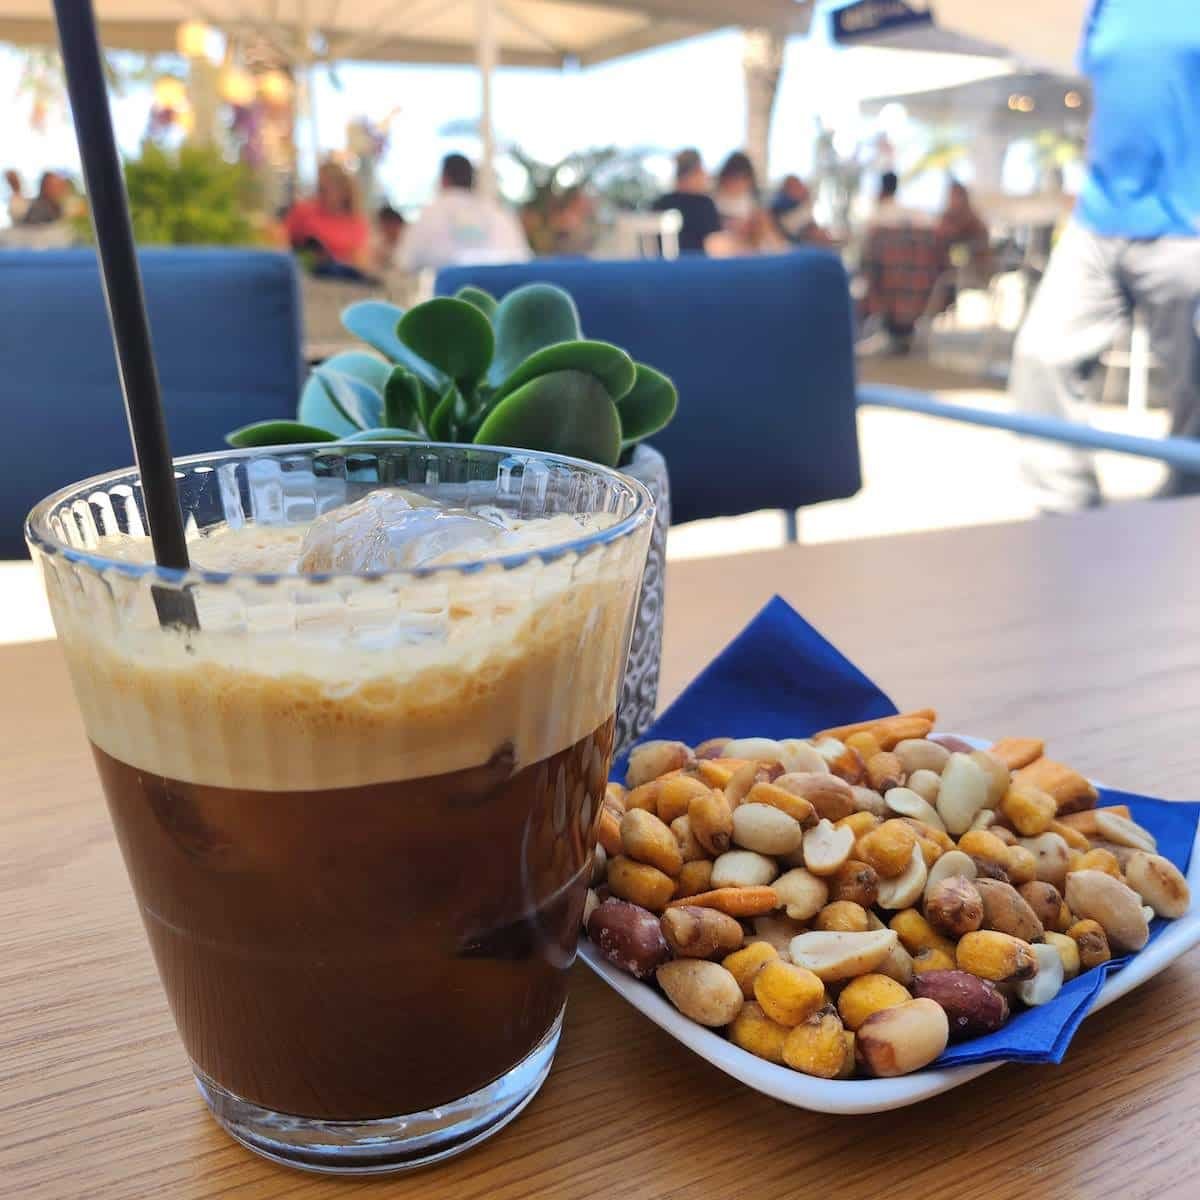 A glass of iced coffee sits on a table next to a plate of nuts in Greece.